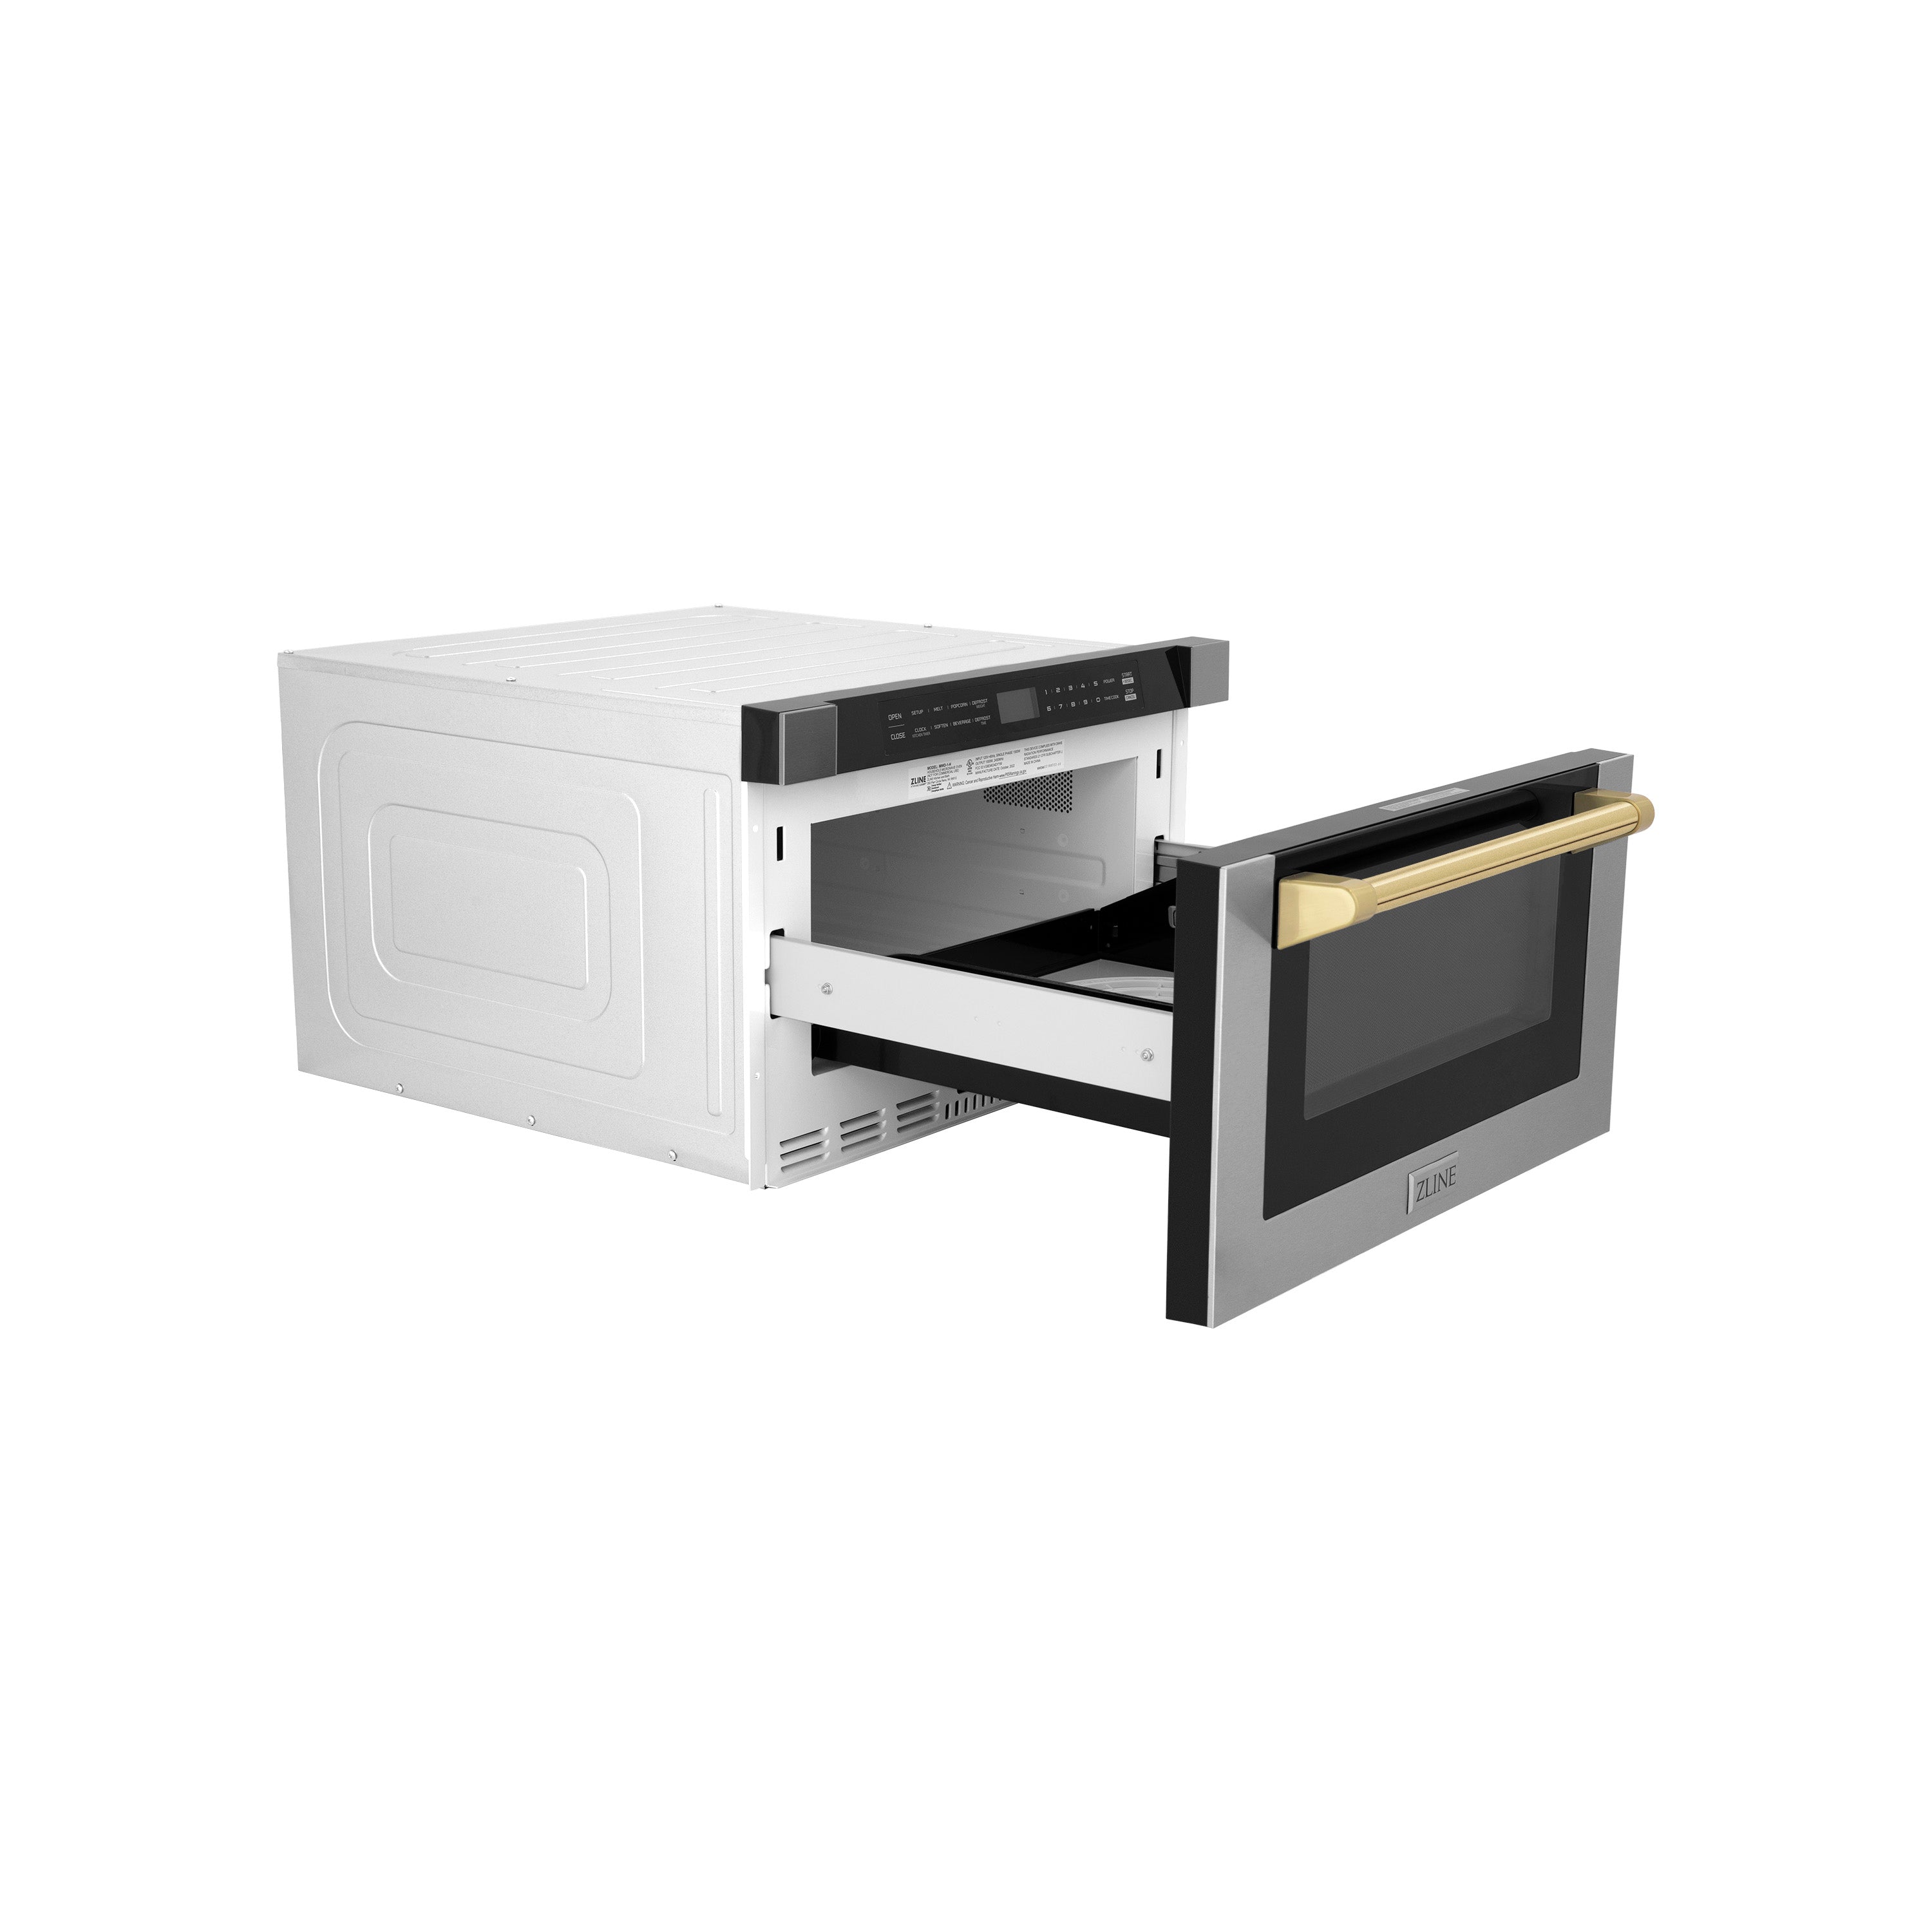 ZLINE Autograph Edition 24" 1.2 cu. ft. Built-in Microwave Drawer with a Traditional Handle in Stainless Steel and Polished Polished Gold Accents